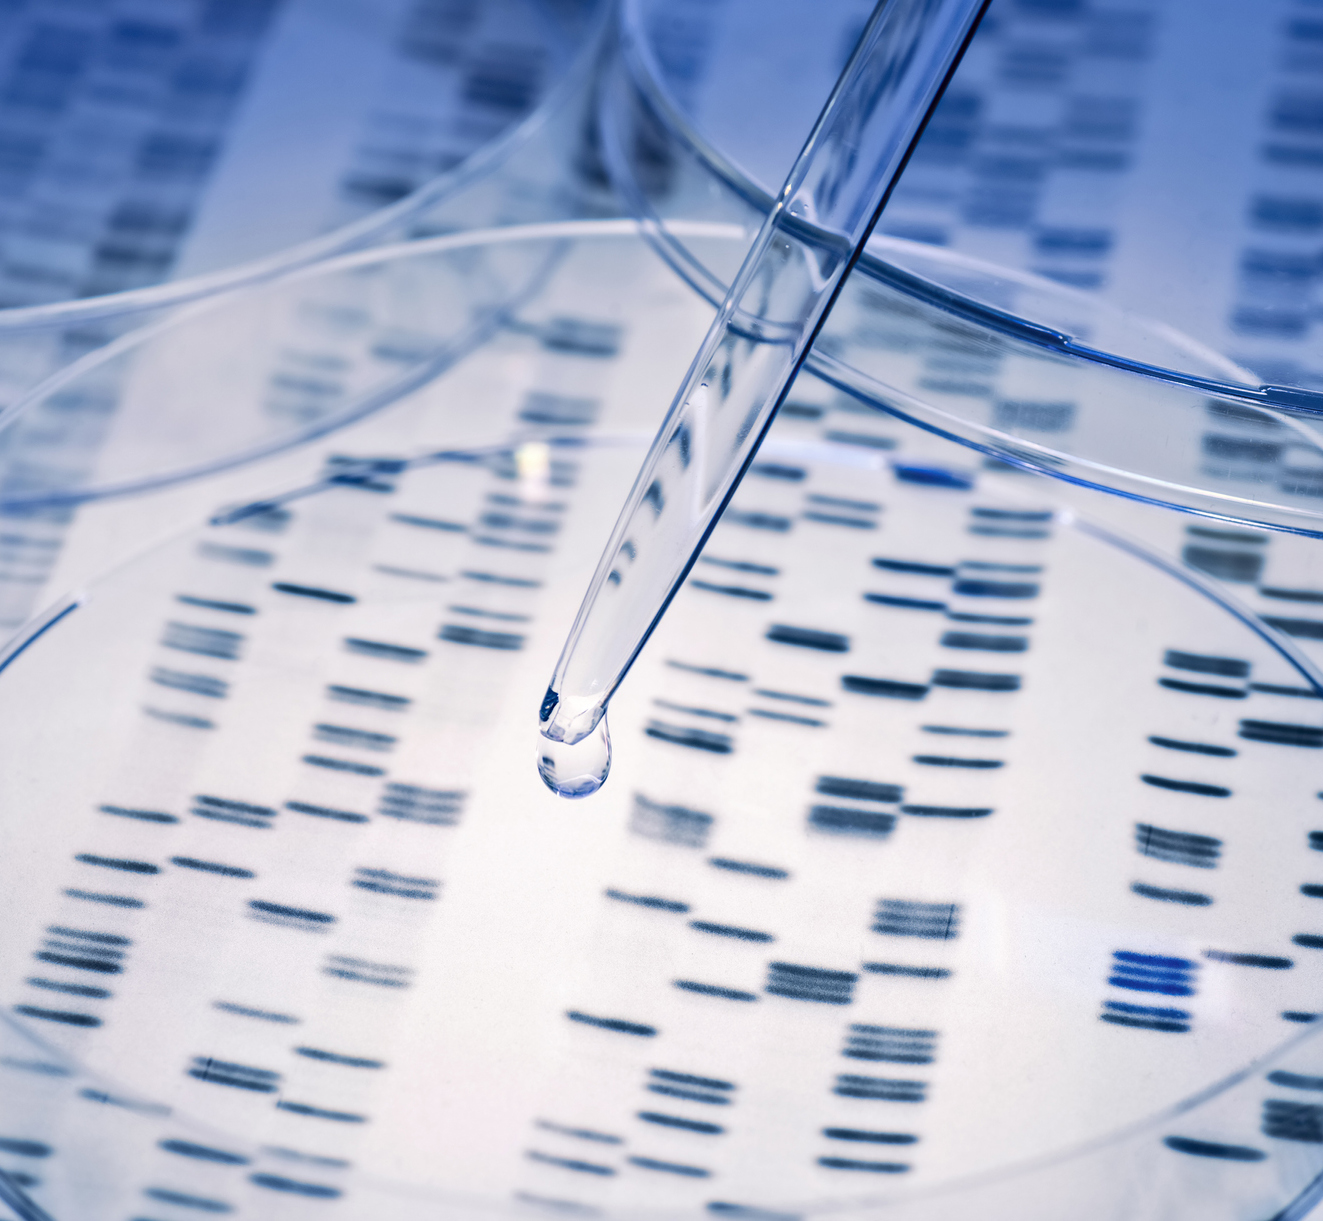 DNA with pipette and Petri dish - stock photo